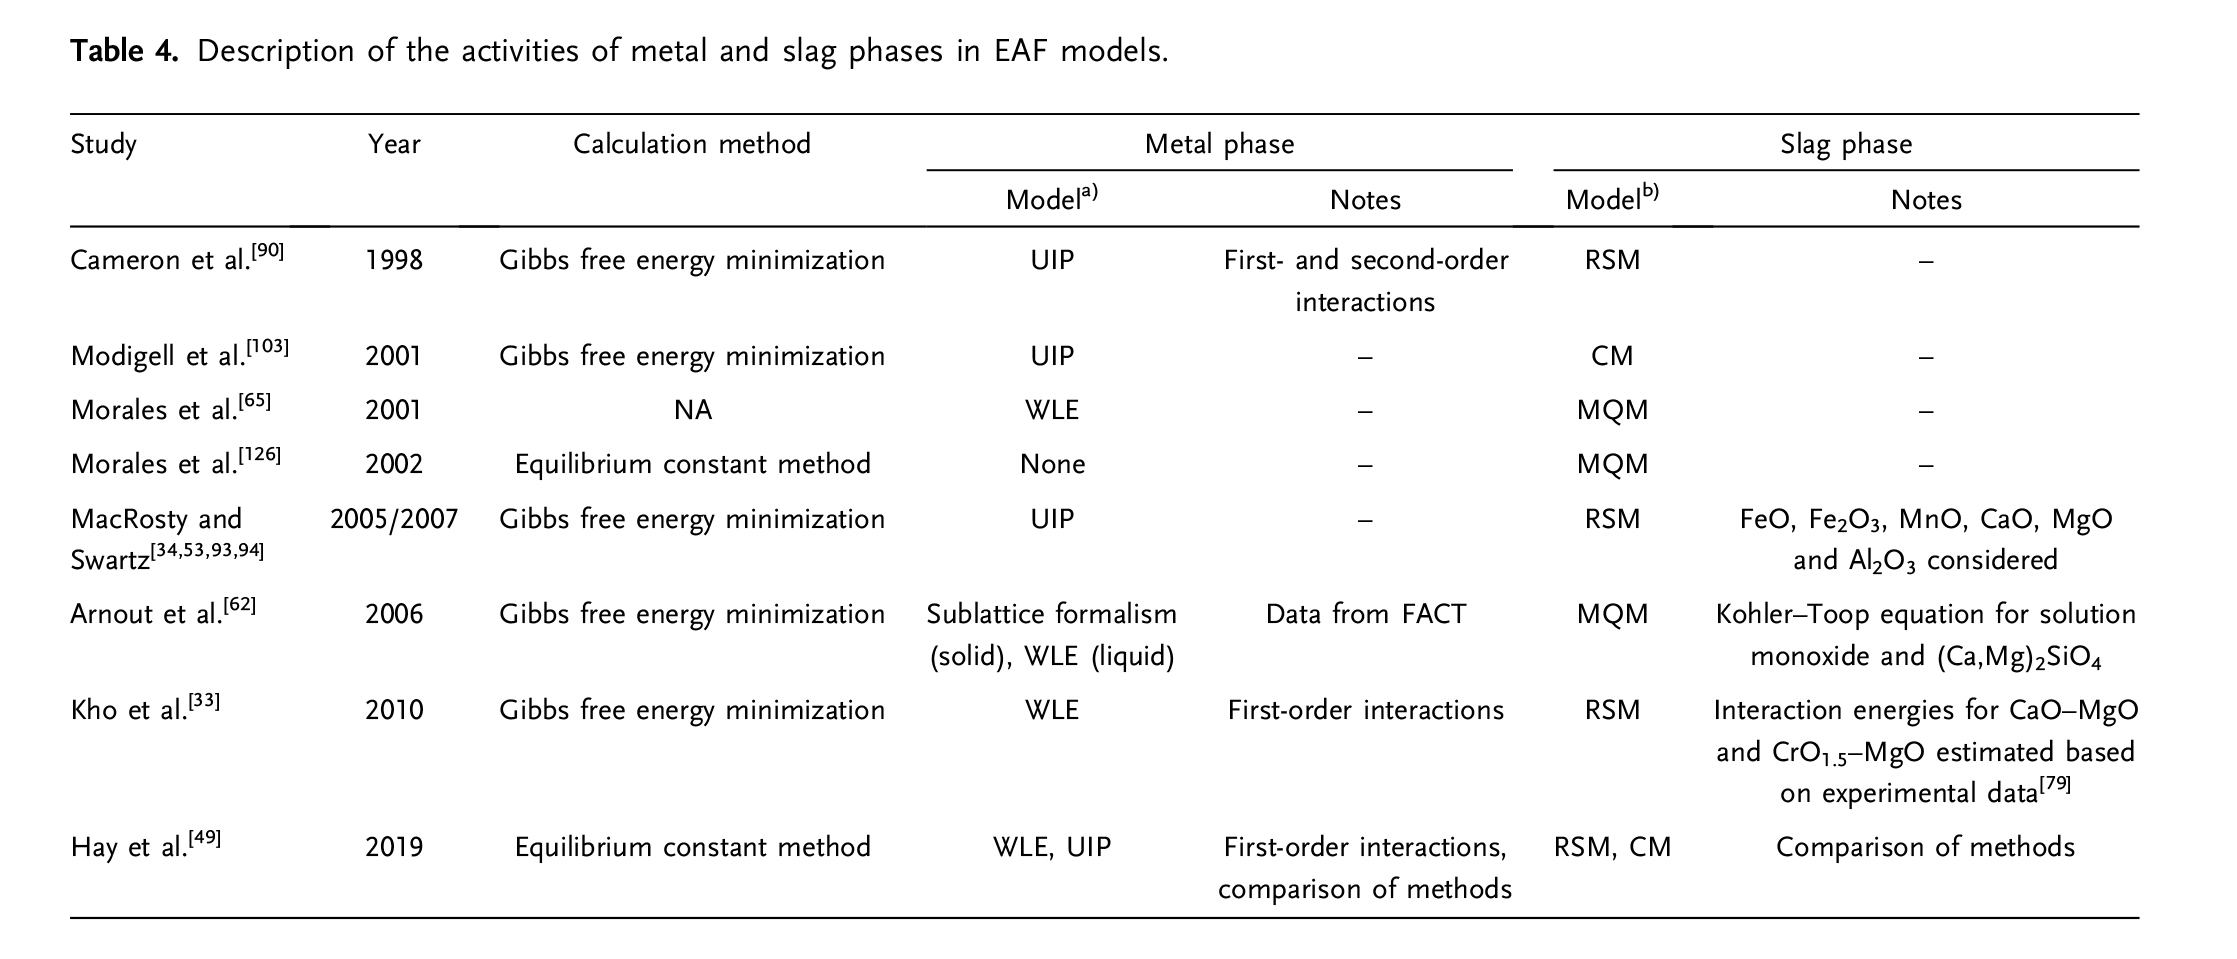 A Review of Mathematical Process Models for the Electric Arc Furnace Process-11